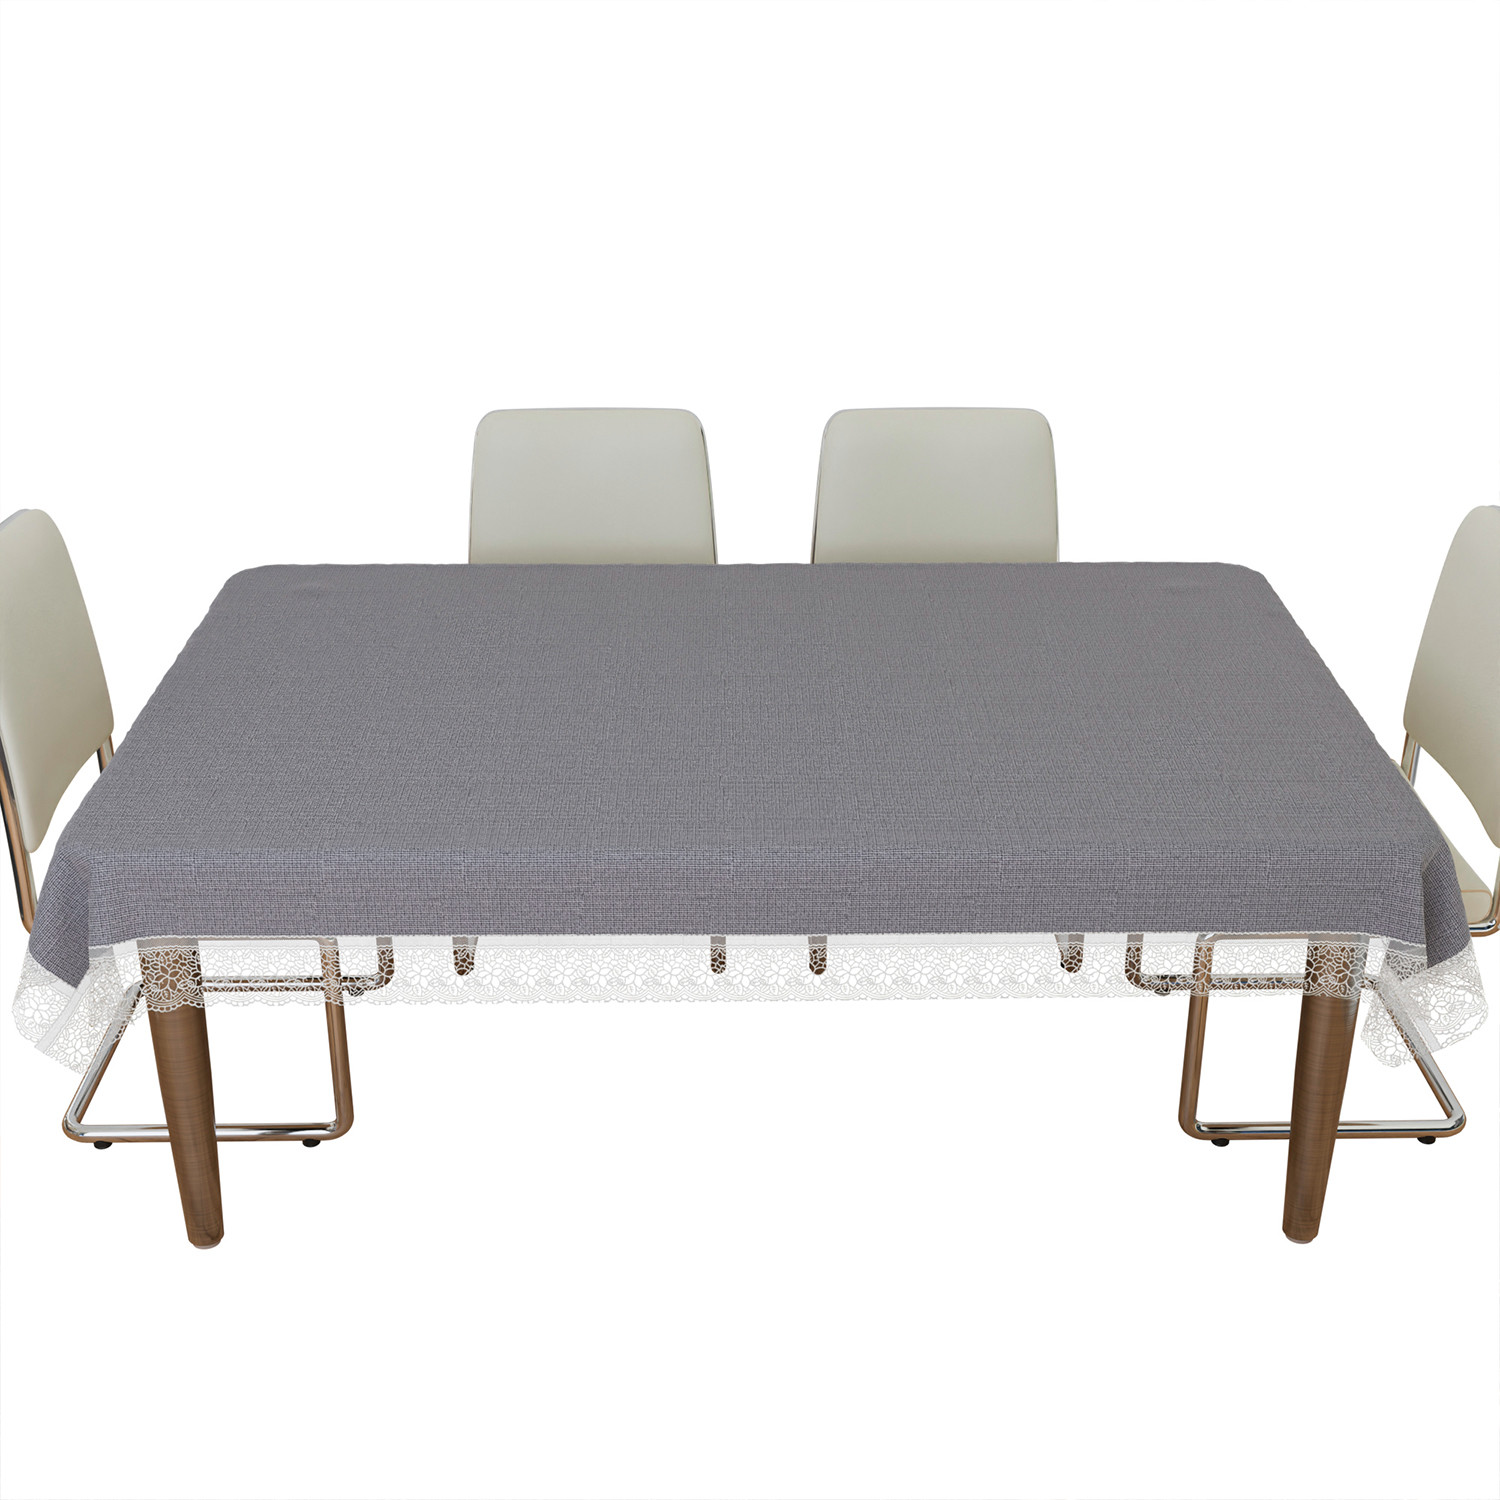 Kuber Industries Dining Table Cover | Kitchen Dining Tablecloth | 6 Seater Dining Table Cover | Dining Table Cover for Hall Décor | Plain Texture Tablecloth | DTC | 60x90 | Gray